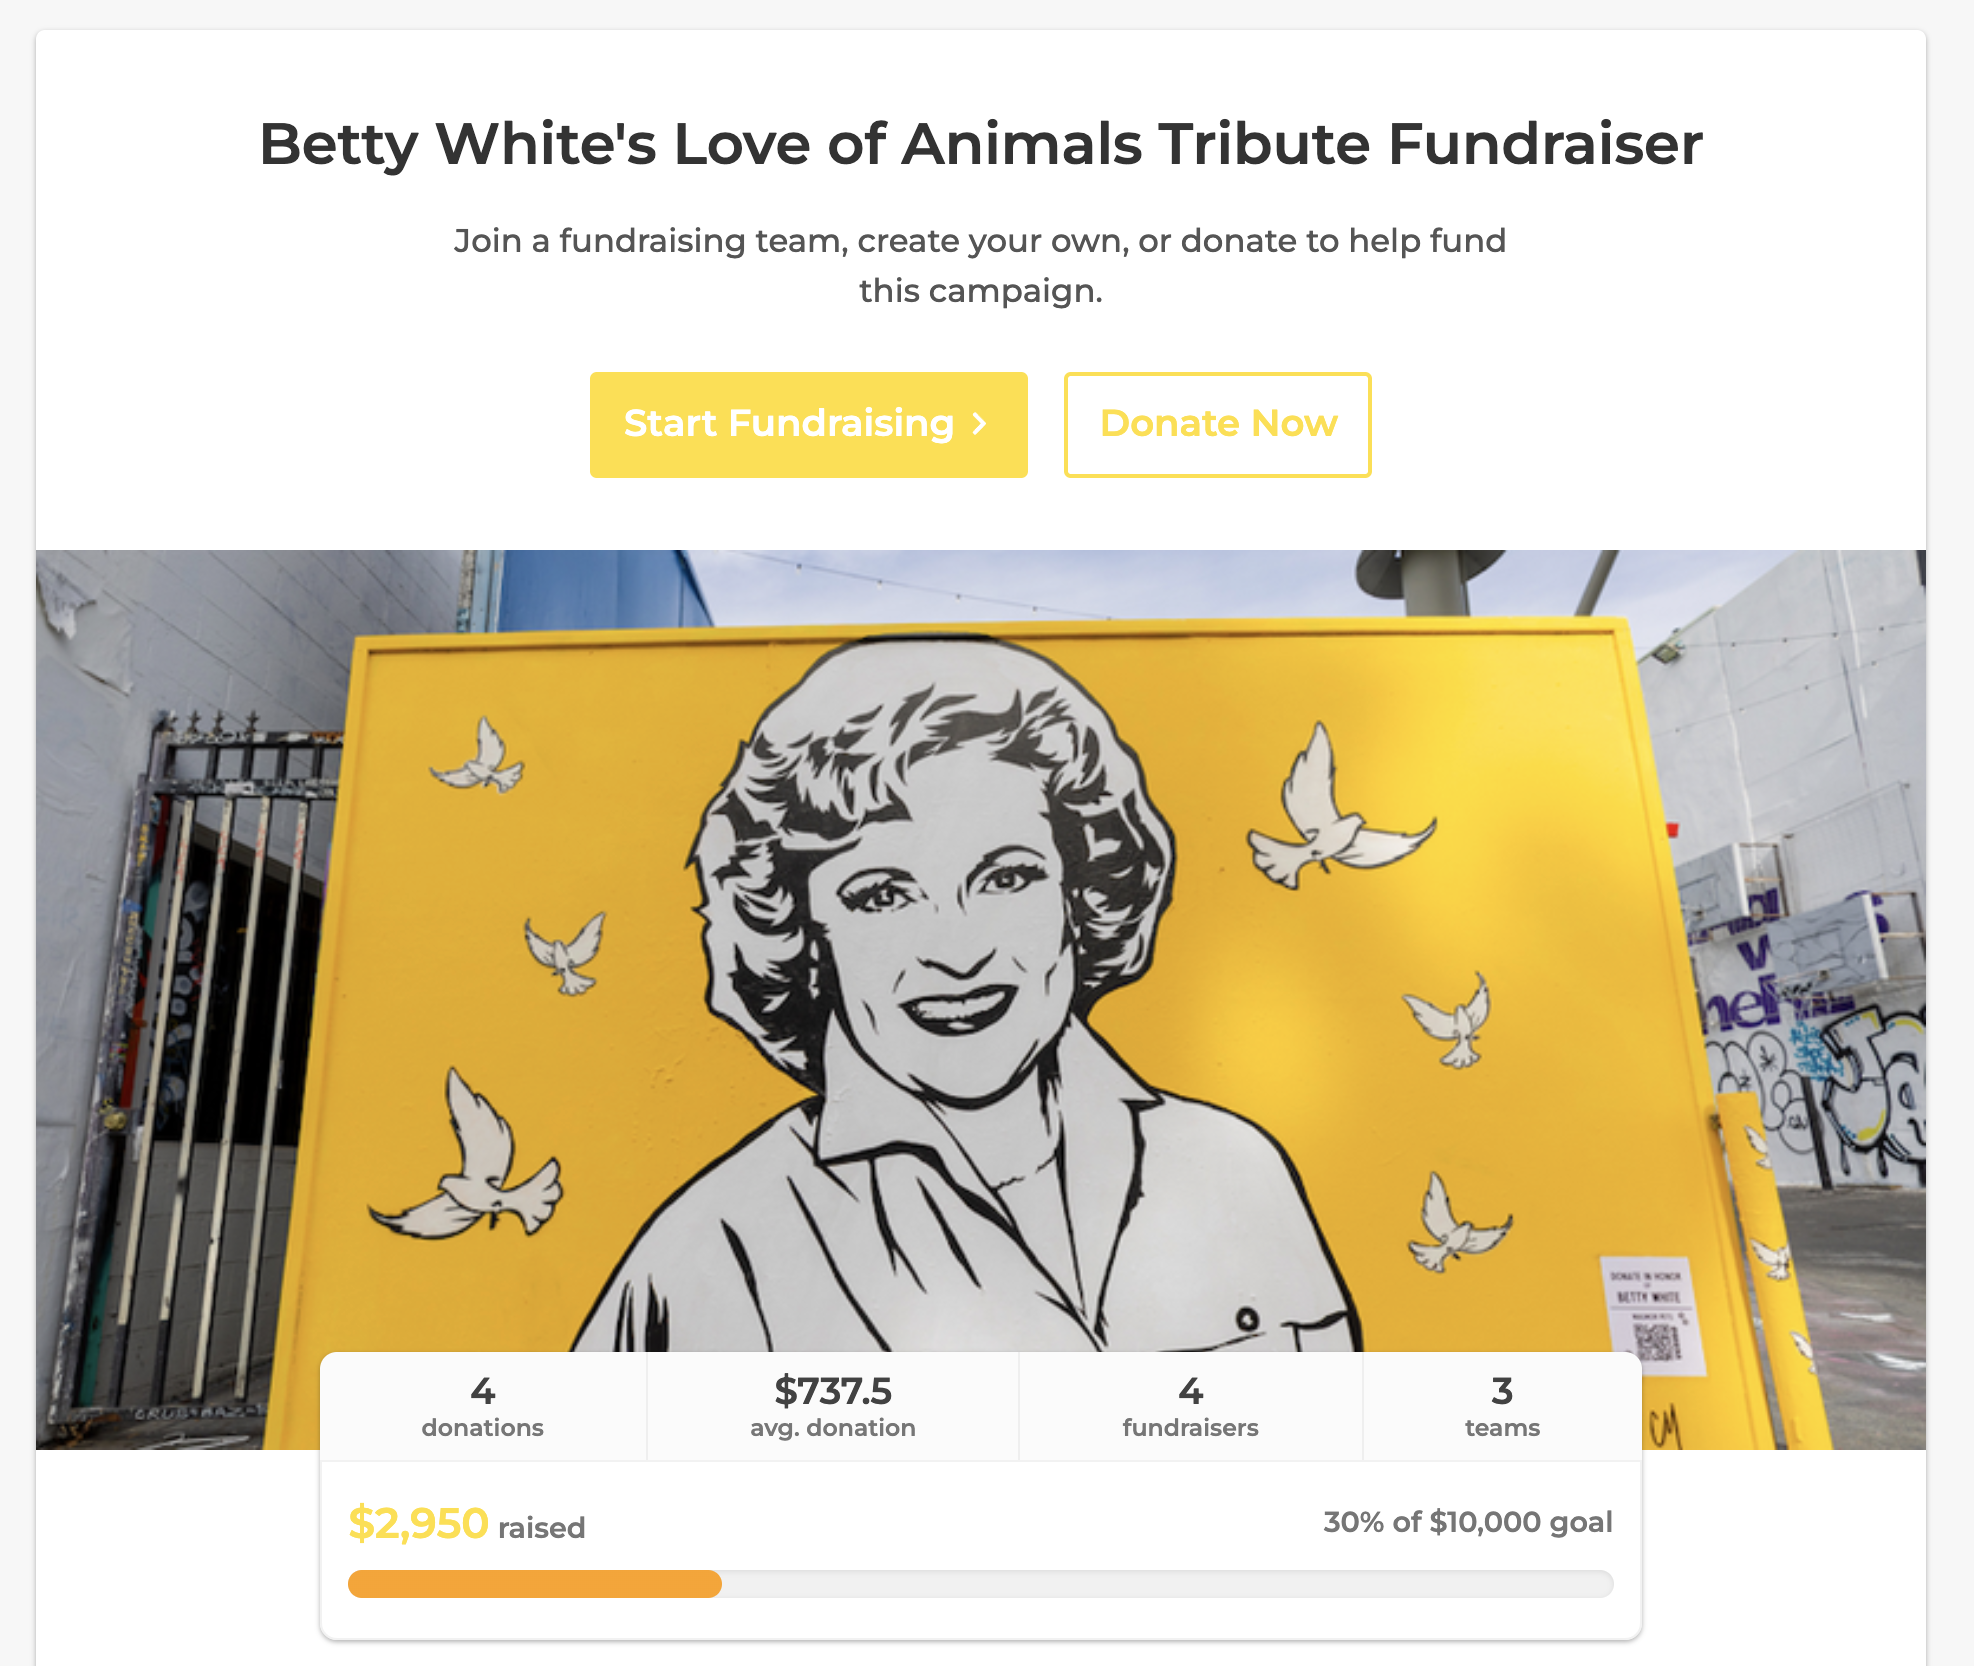 Betty White's Love of Animals Tribute Fundraiser. Join a fundraising team, create your own, or donate to help fund this campaign. [donation options below] Goal bar shows $2,950 raised of a $10,000 goal. 